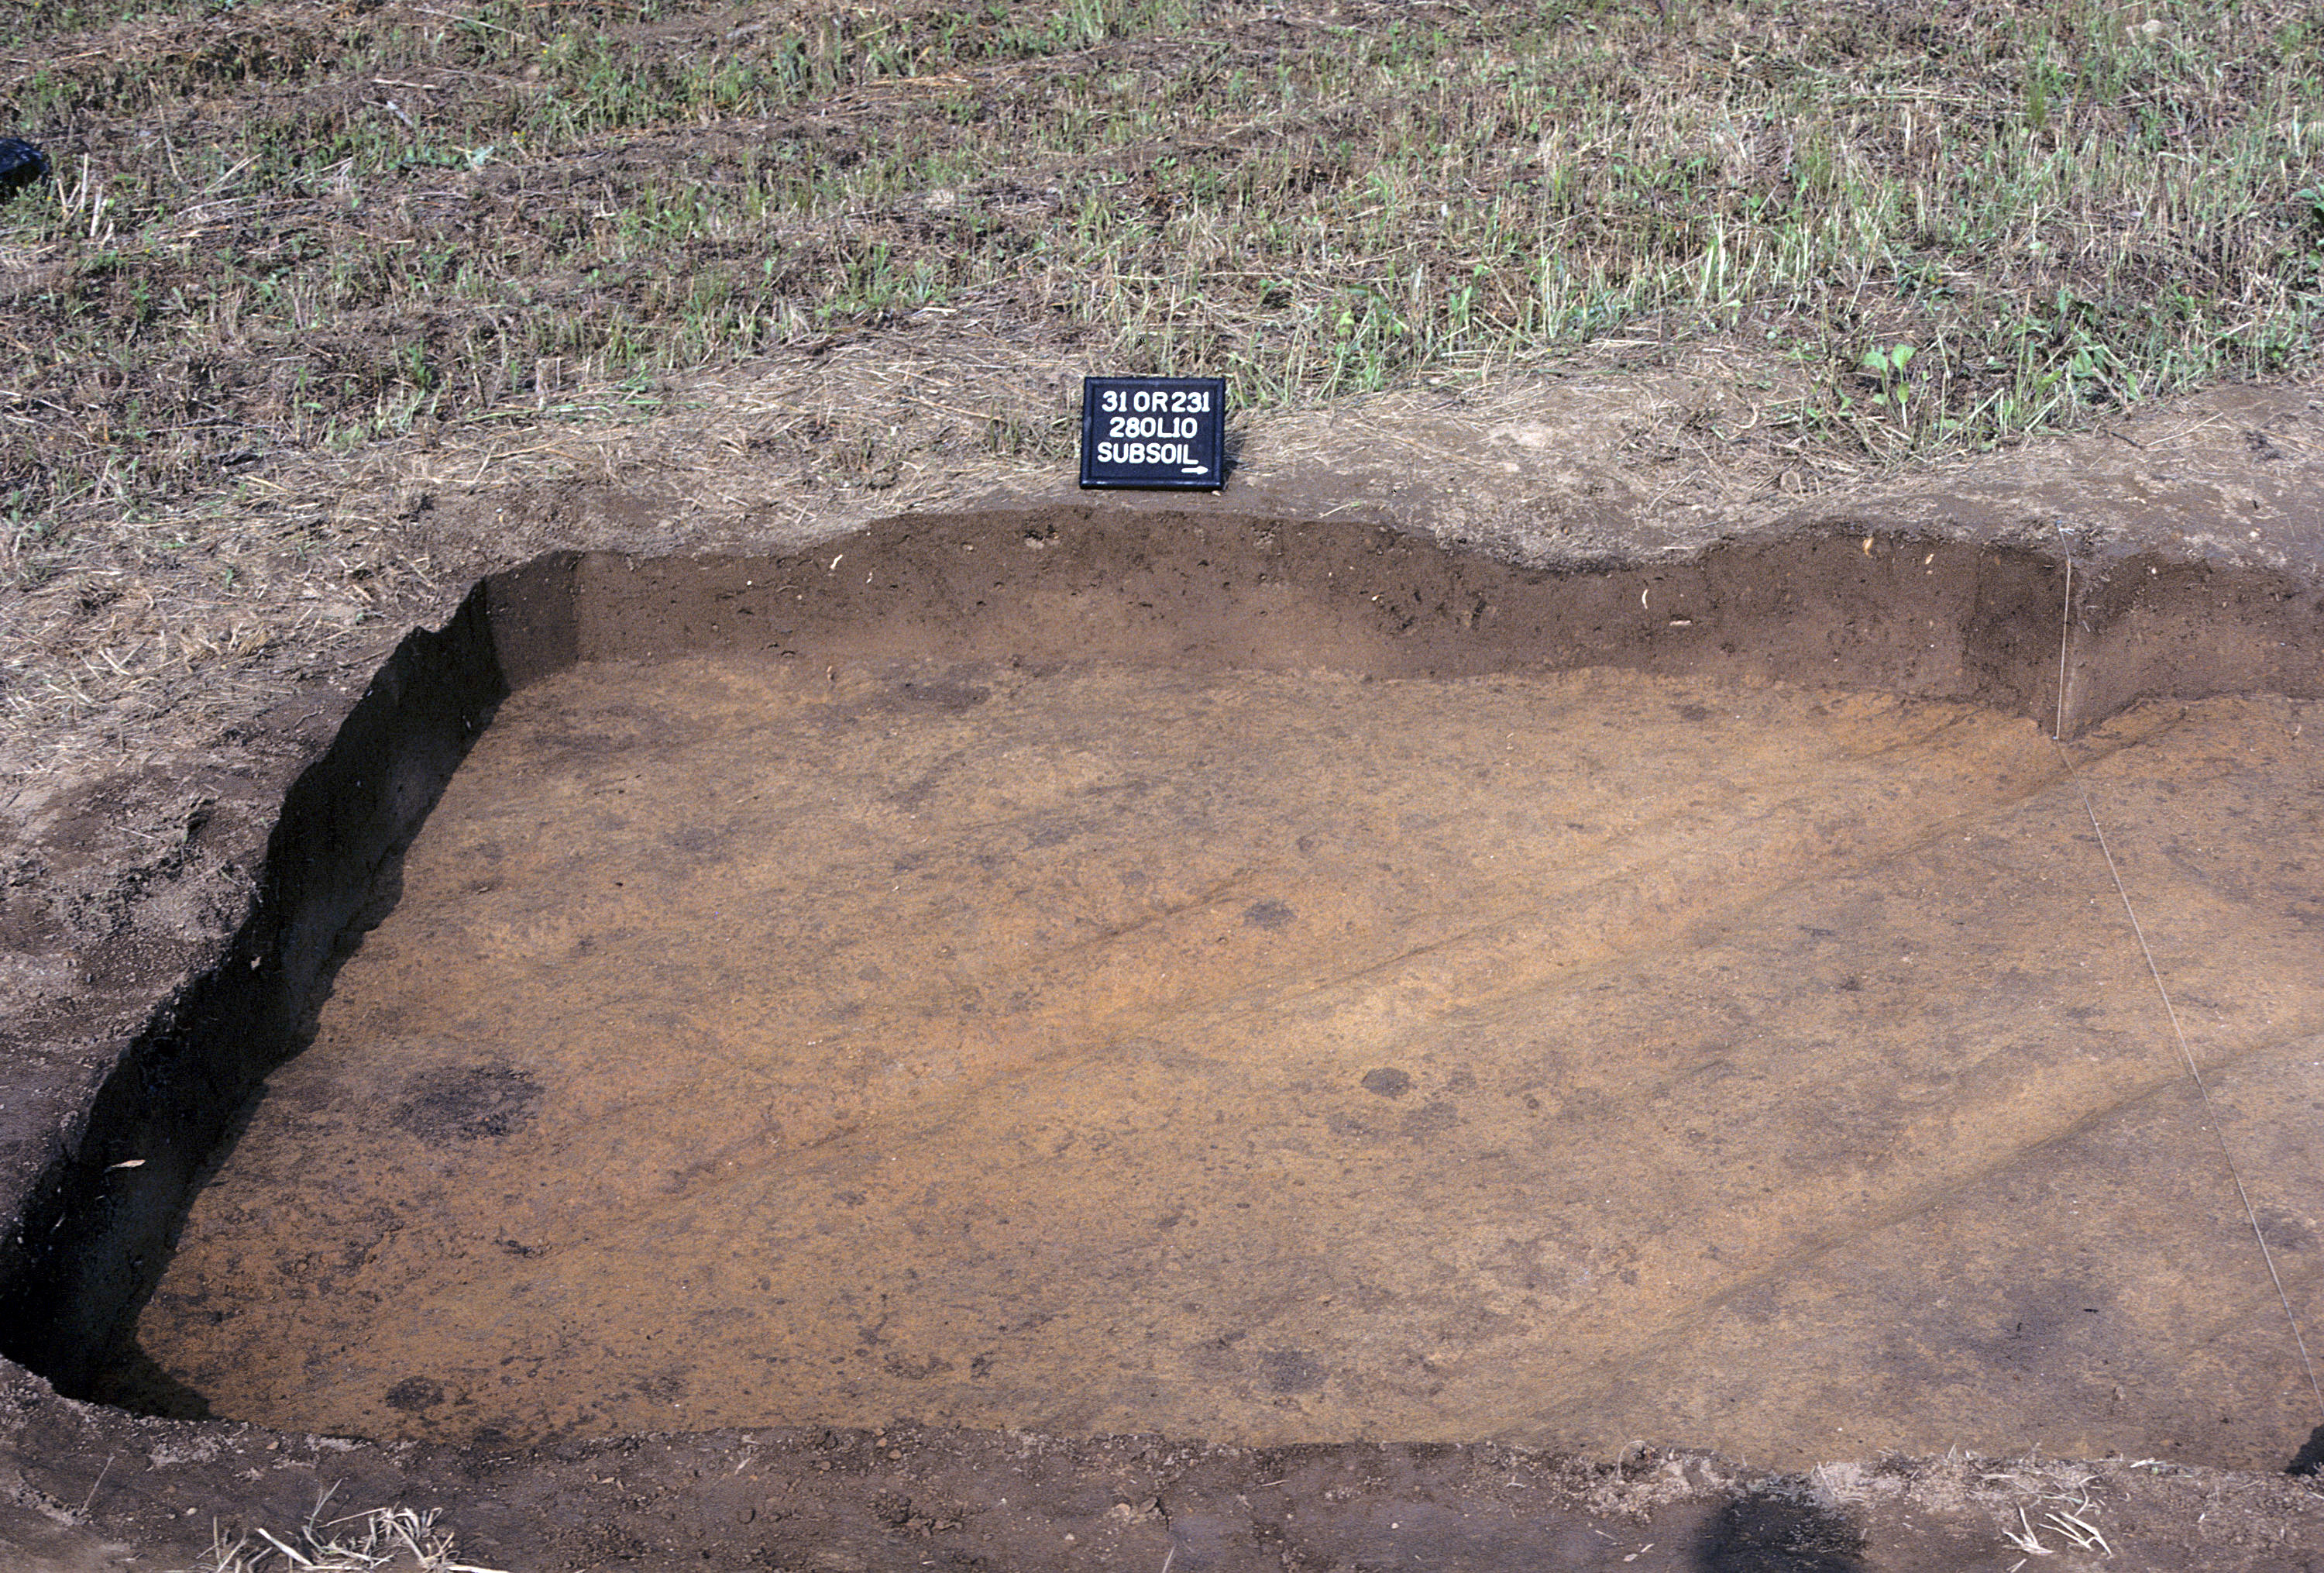 Figure 944. Sq. 280L10 at top of subsoil (view to west).